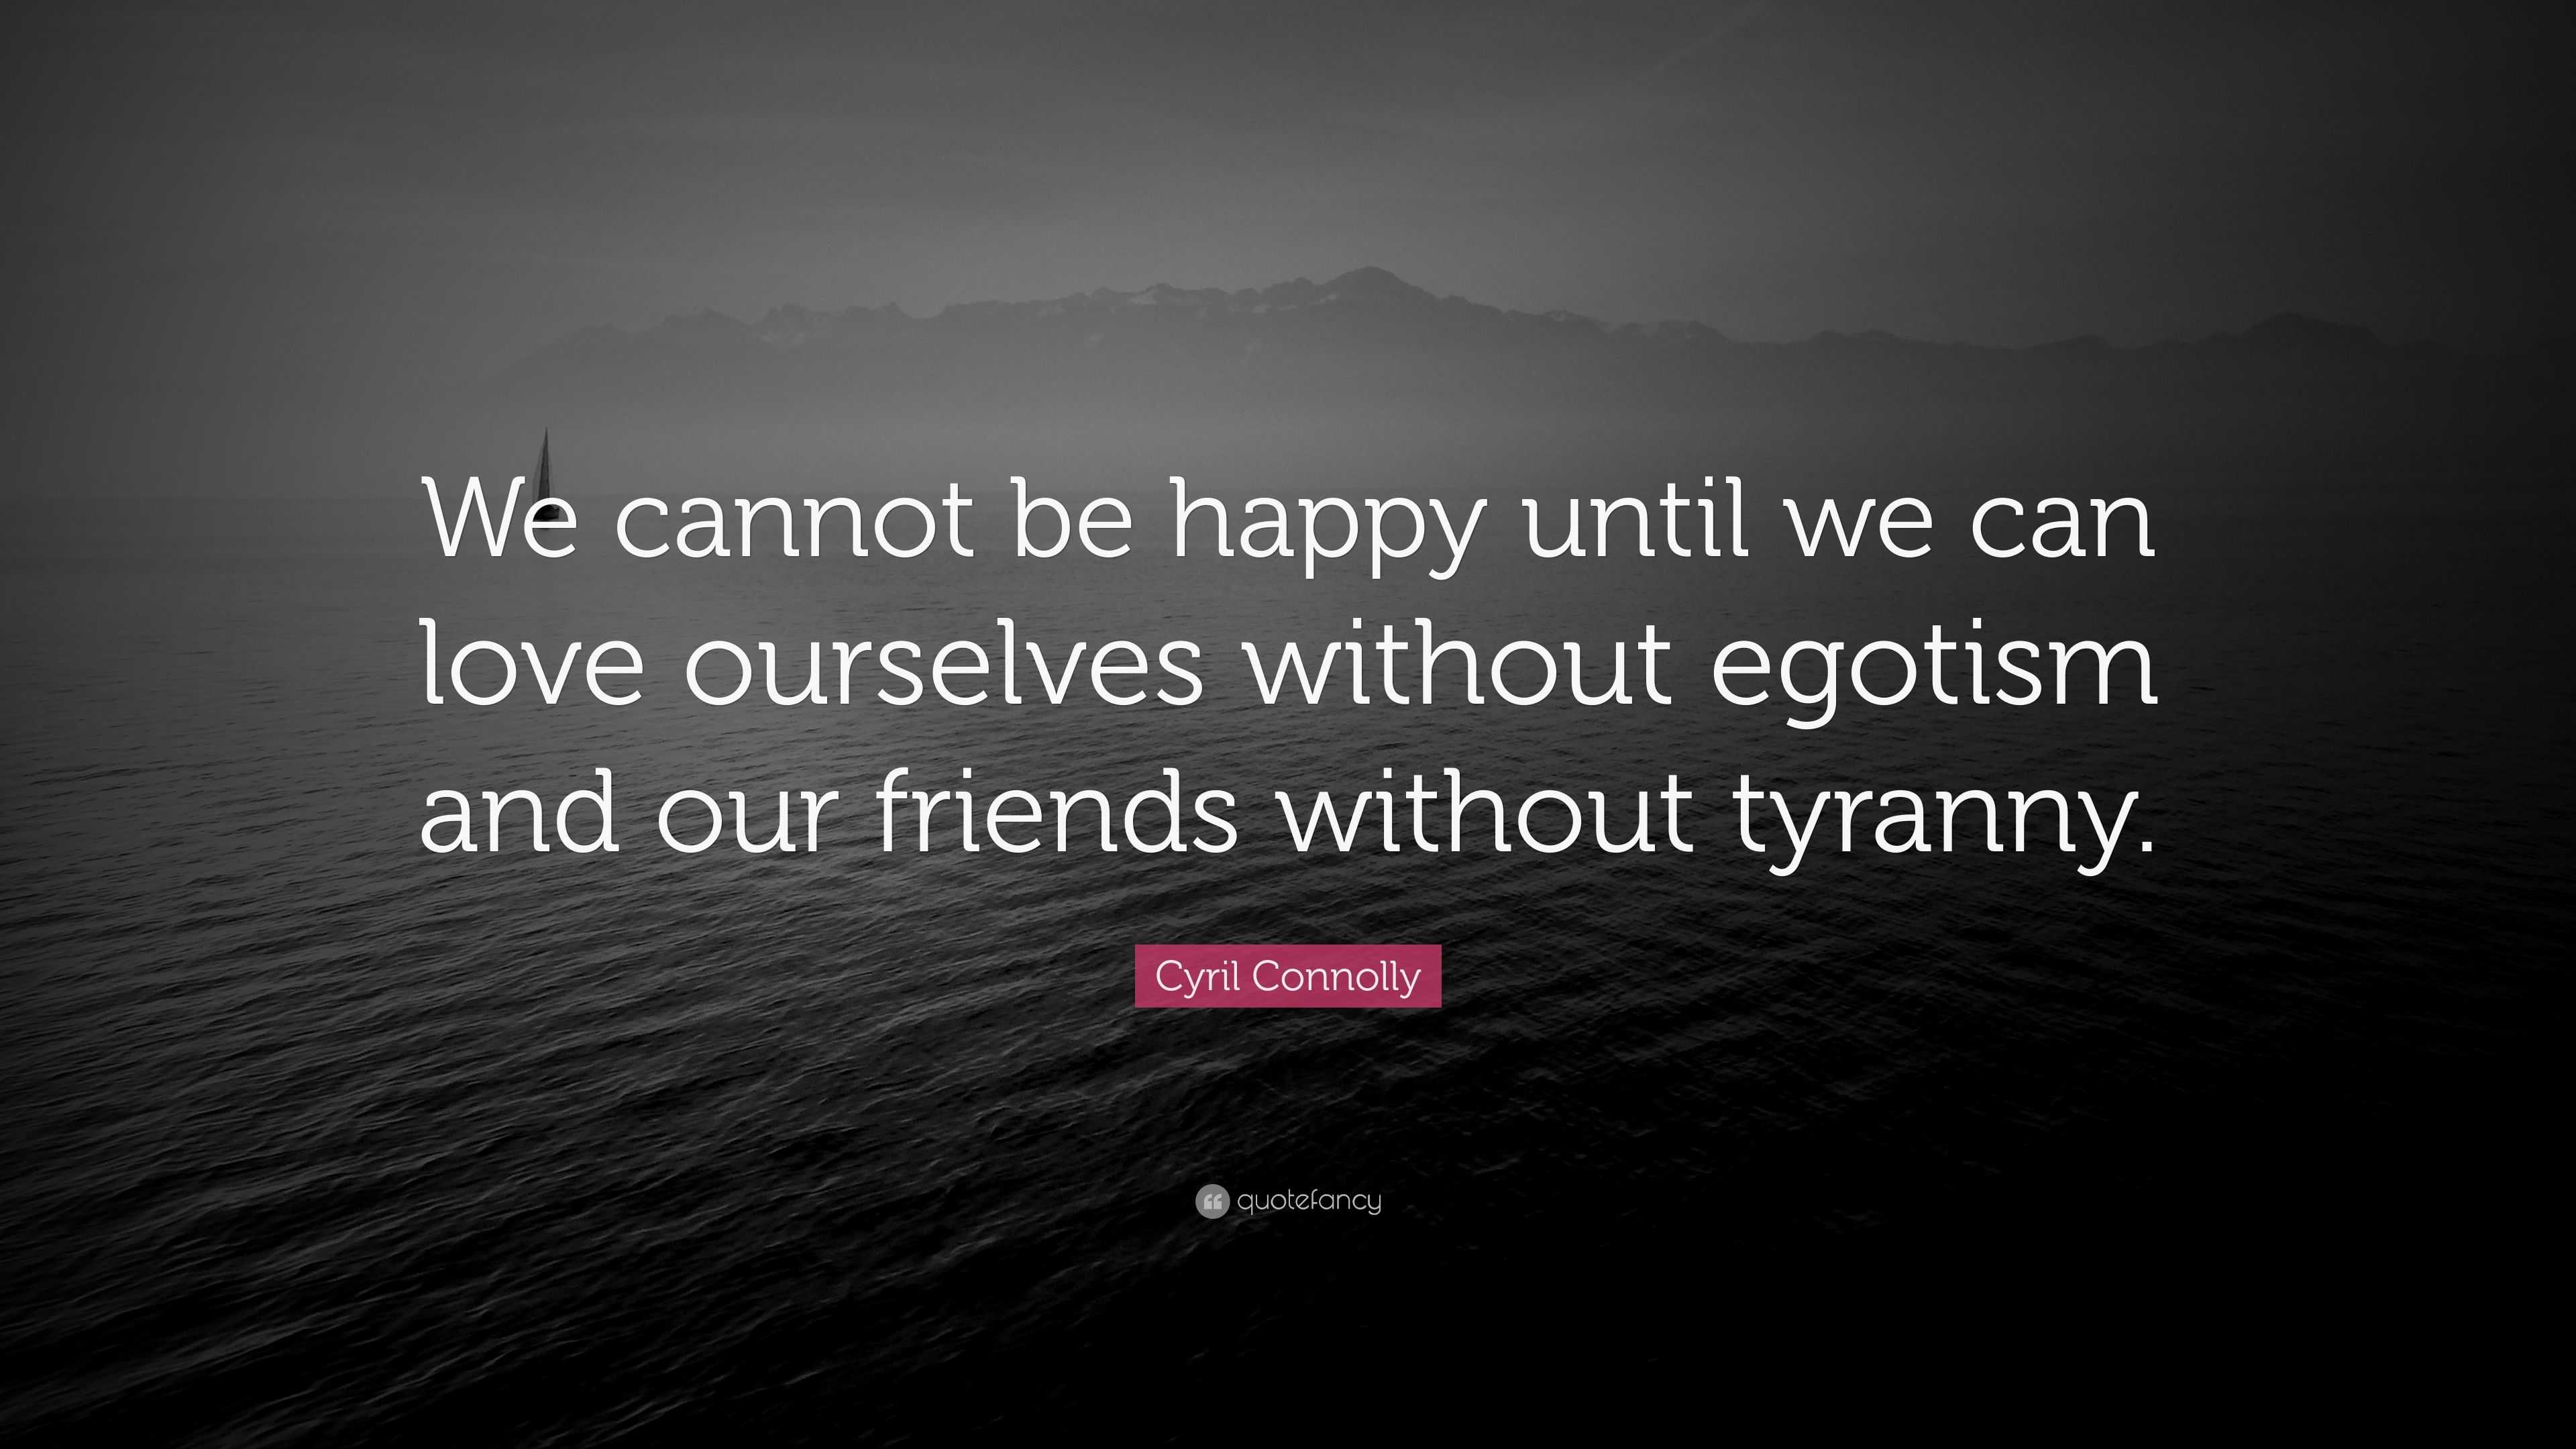 Cyril Connolly Quote “we Cannot Be Happy Until We Can Love Ourselves Without Egotism And Our